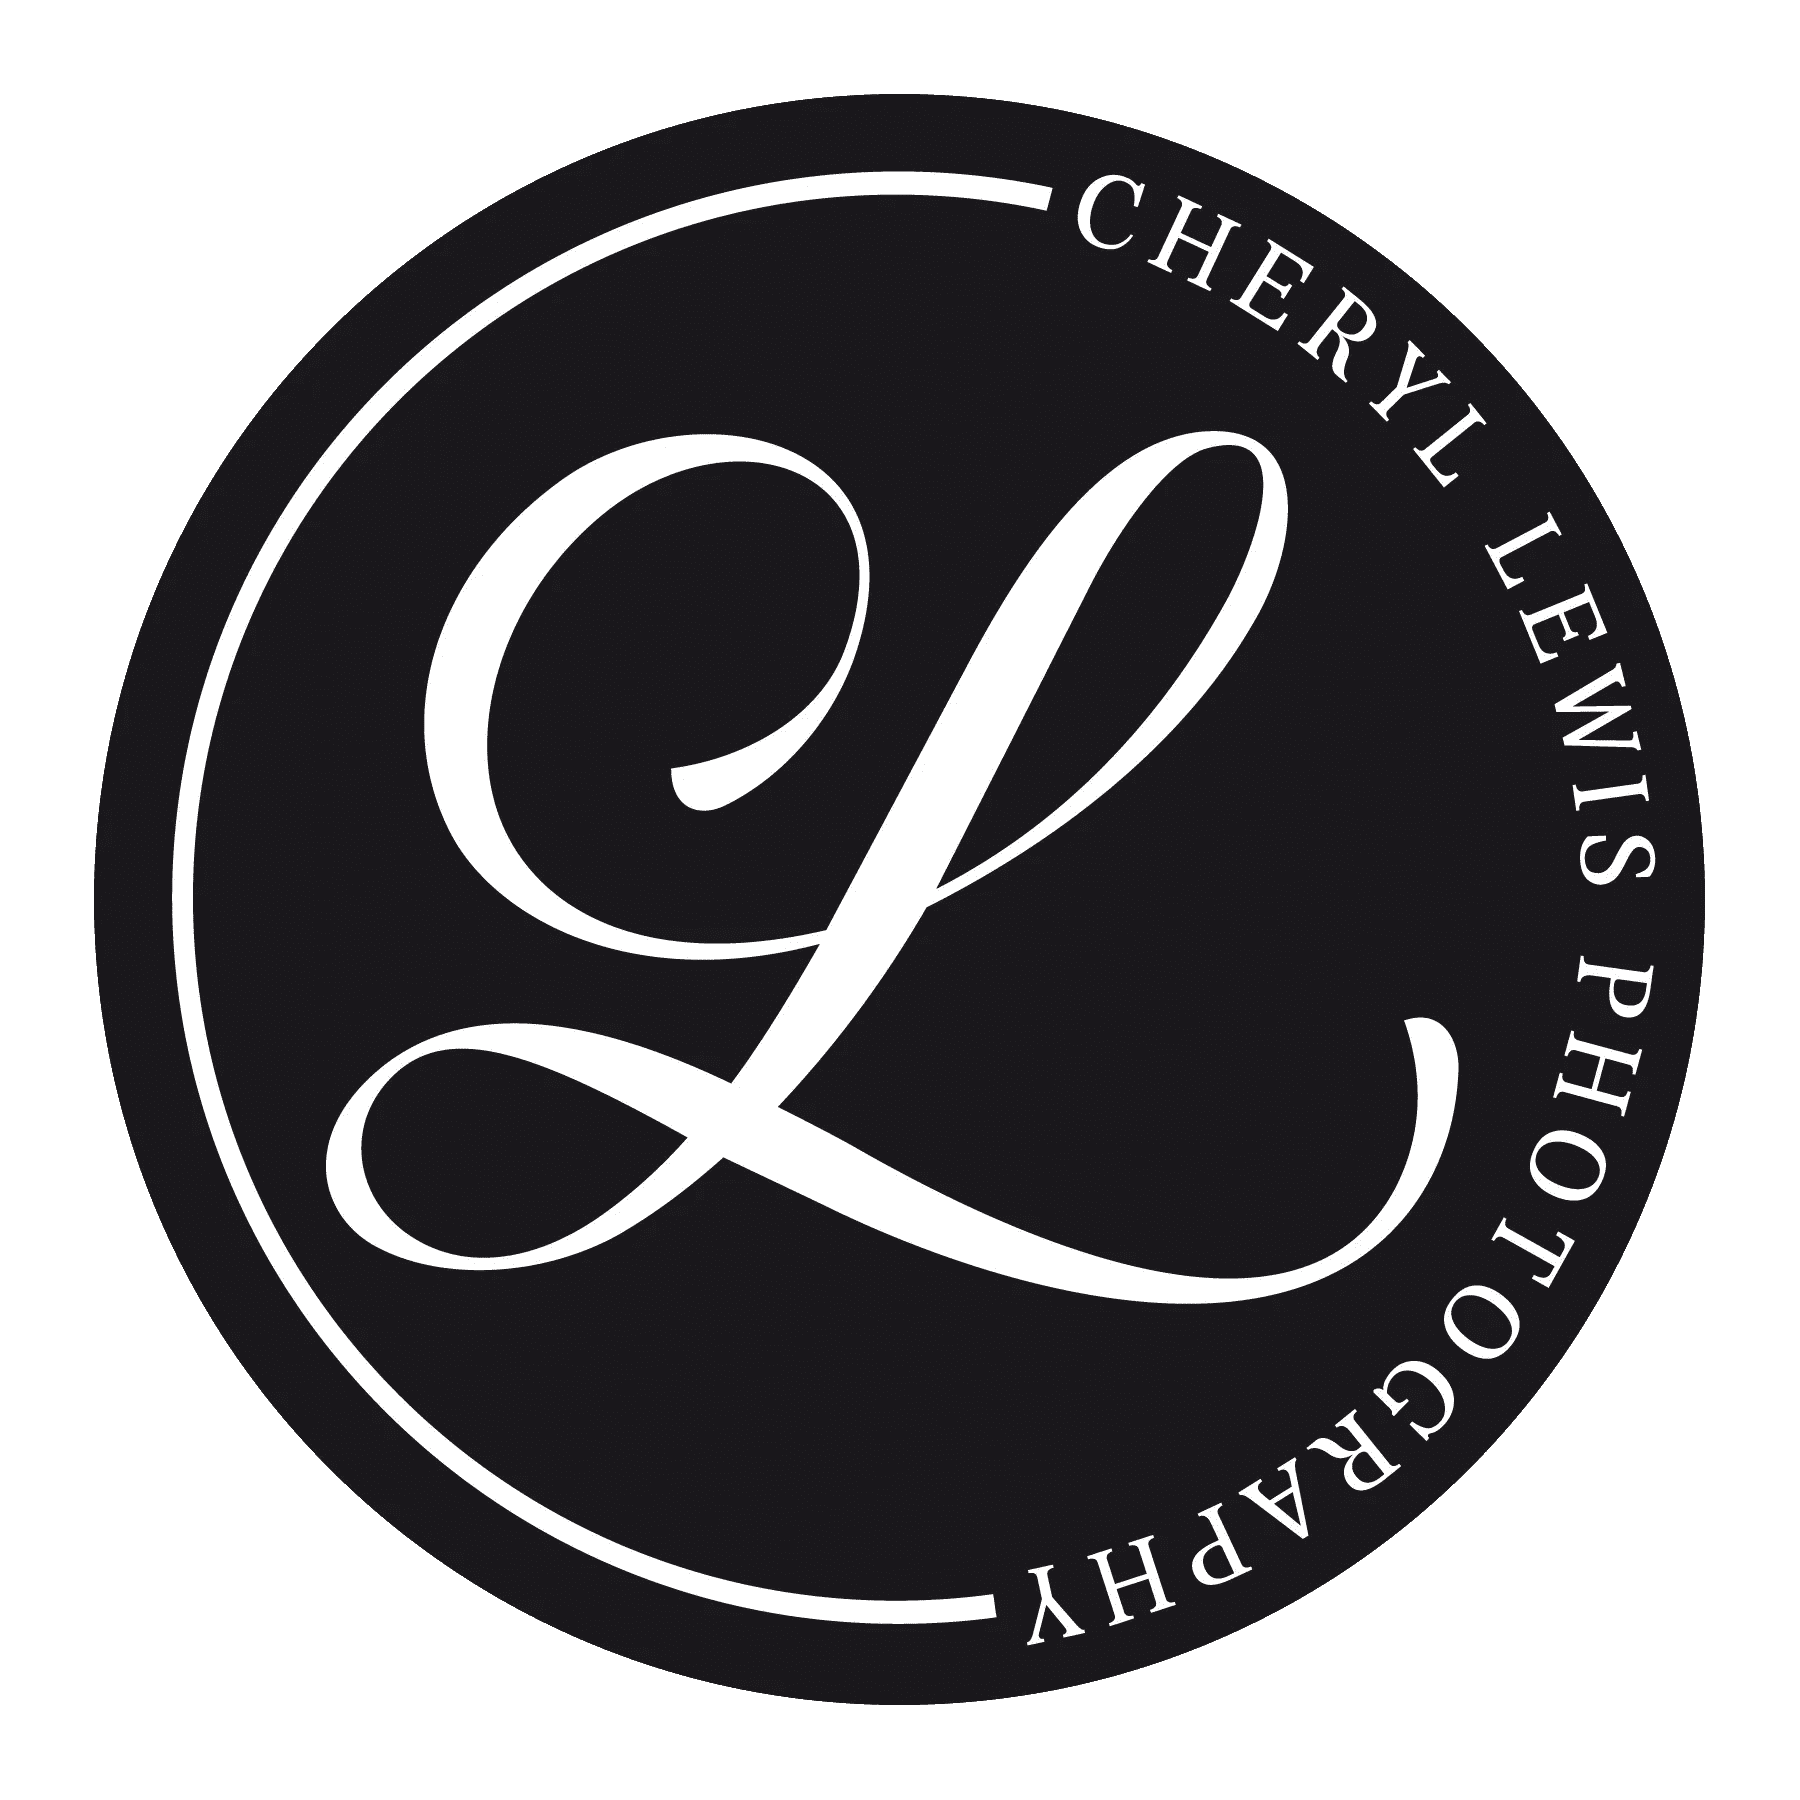 A black and white photo of the cheryl lewis photography logo.